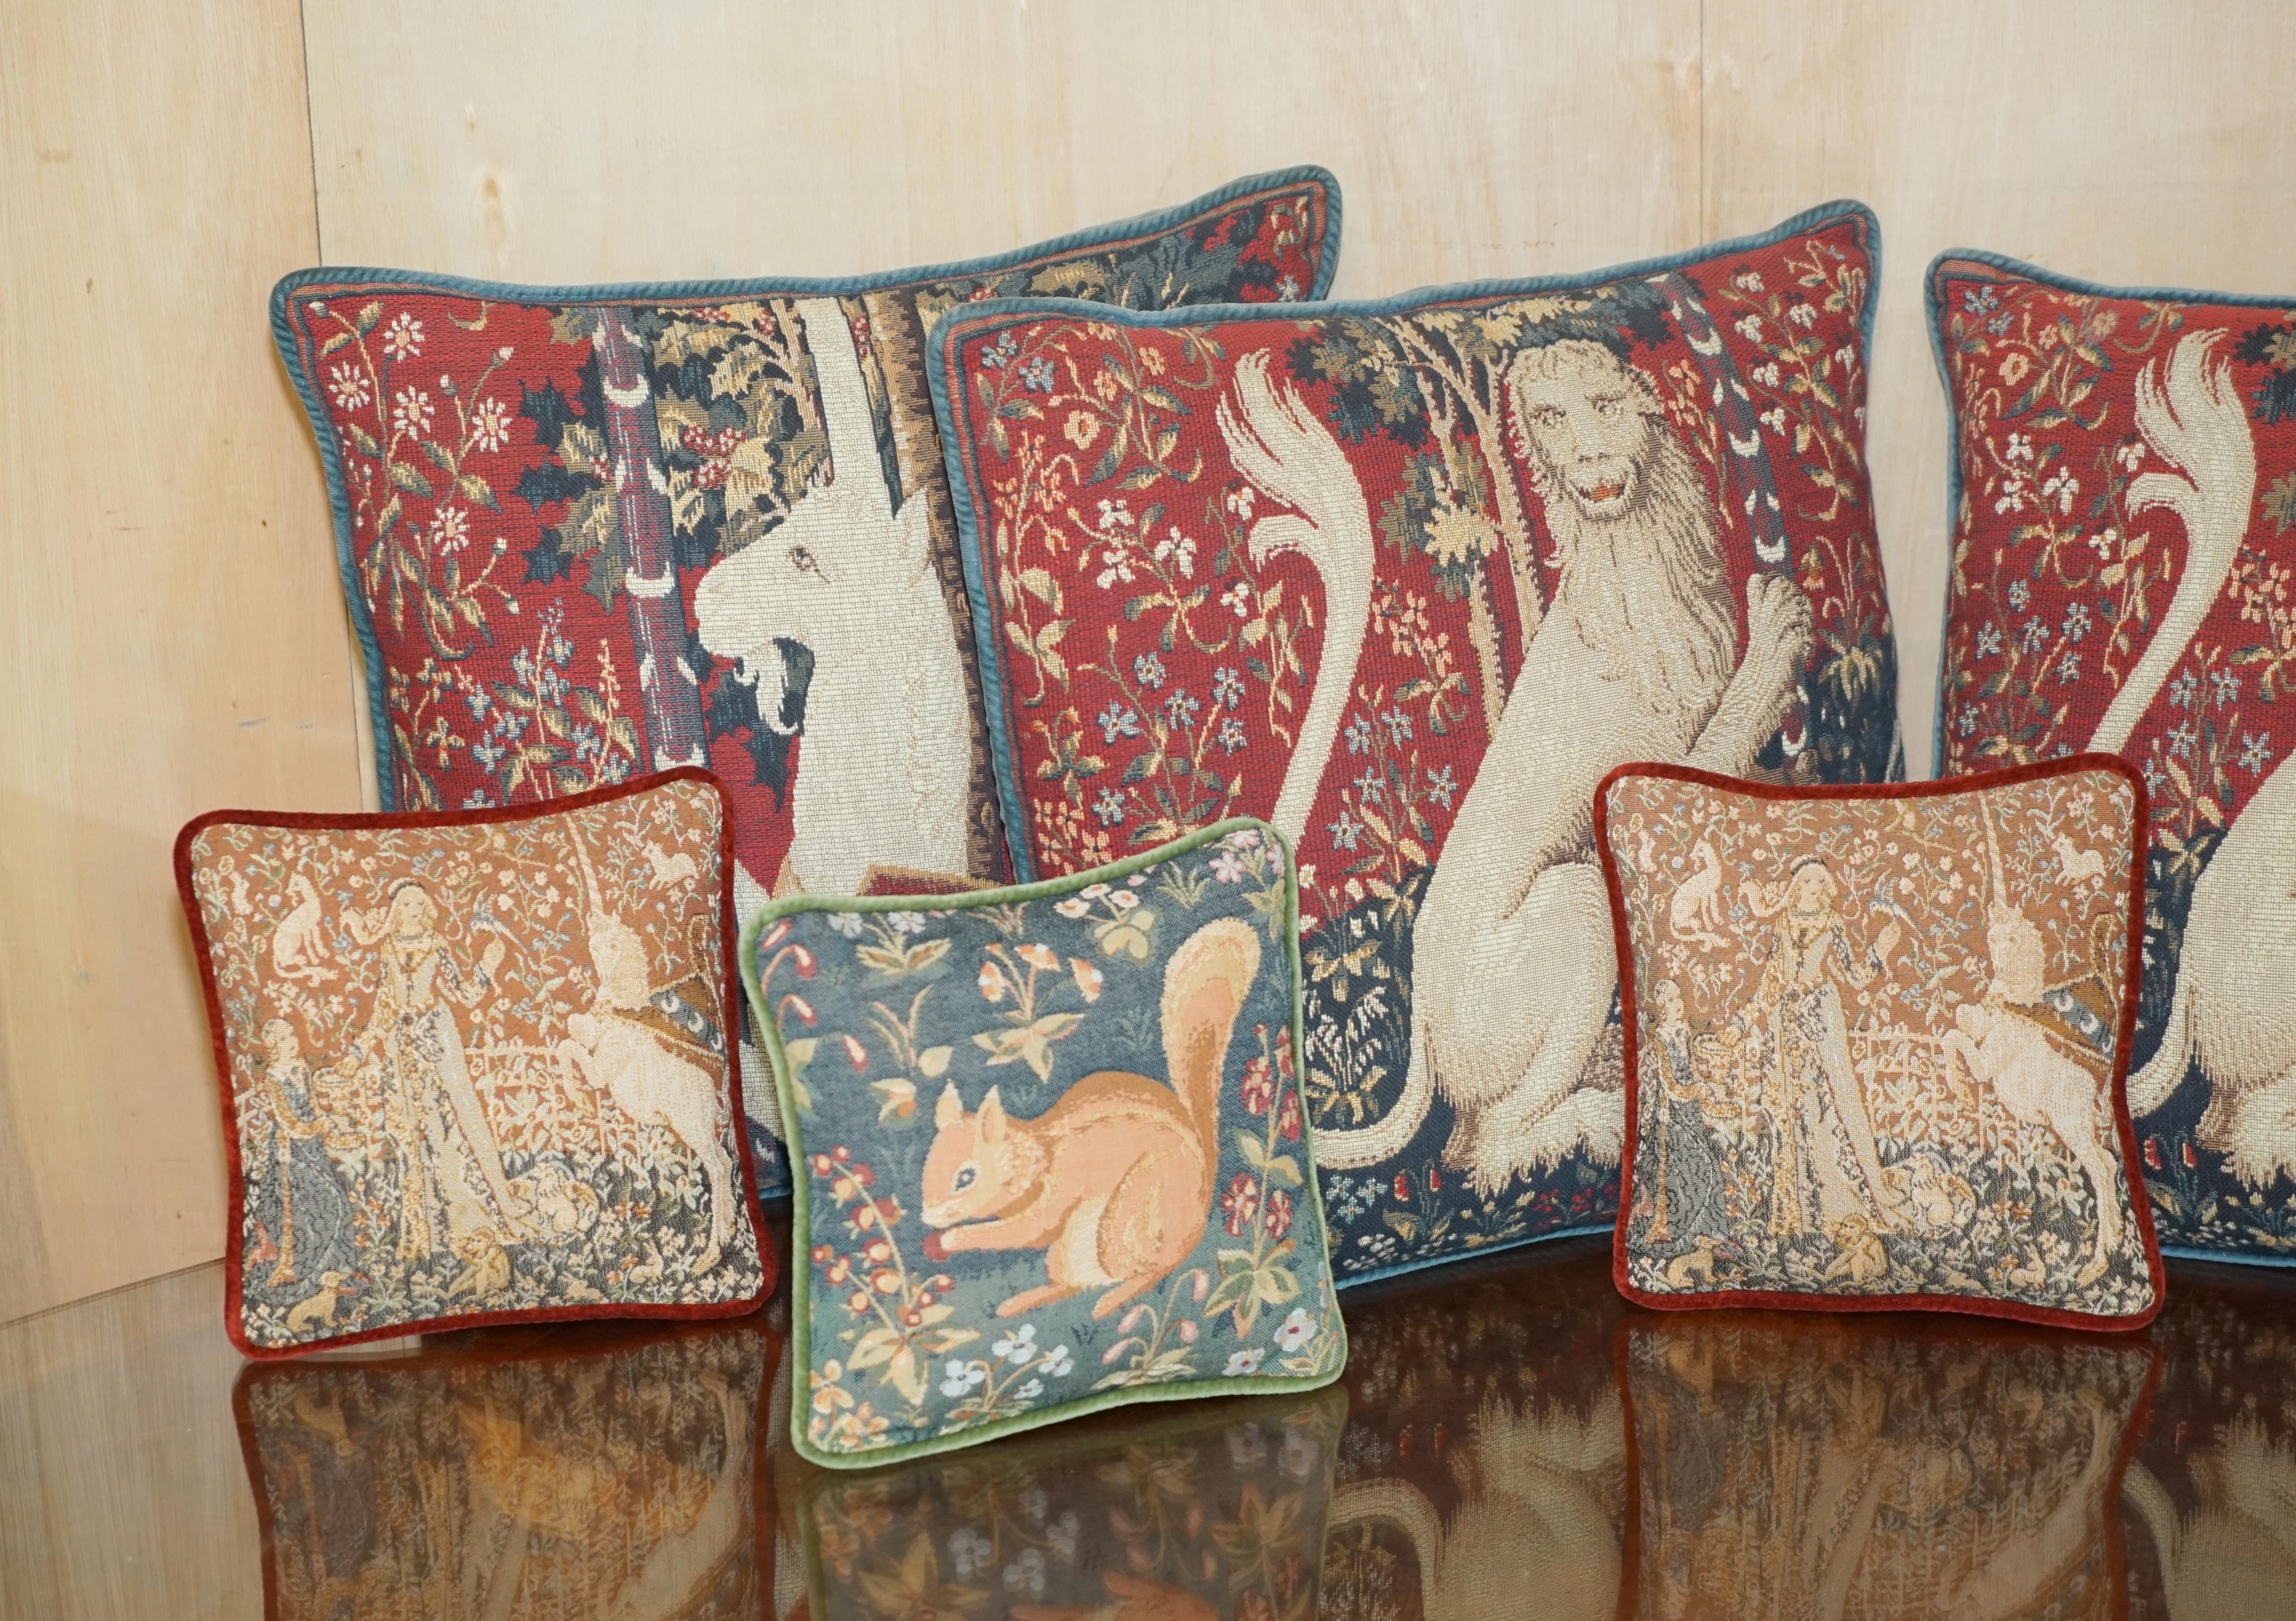 We are delighted to offer for sale this stunning suite of nine vintage French style cushions all with heavily detailed embroidered finish

A lovely selection they look very William Morris Forest Linen

These beautiful tapestry cushions are